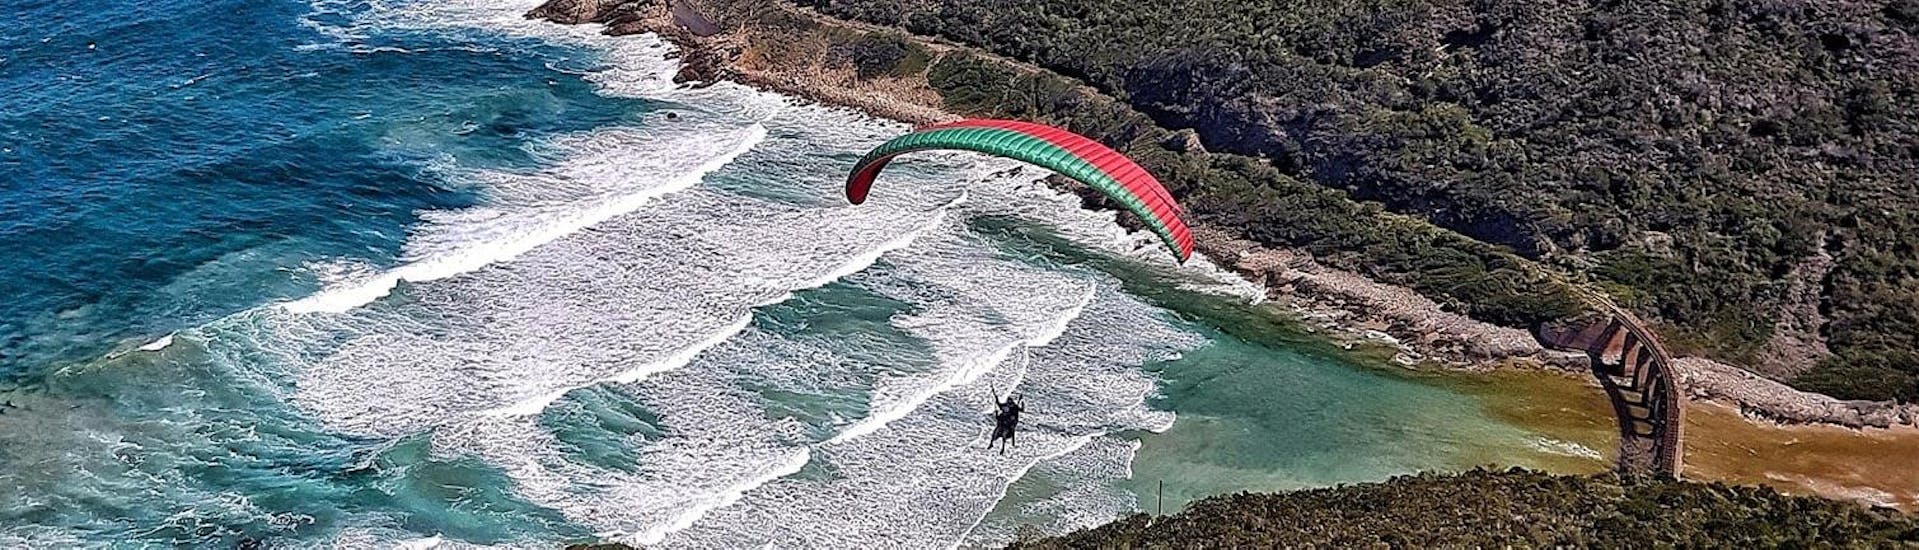 A tandem pilot from Dolphin Paragliding is landing with a client during the Paragliding in Wilderness - Adventure Flight at a beach.